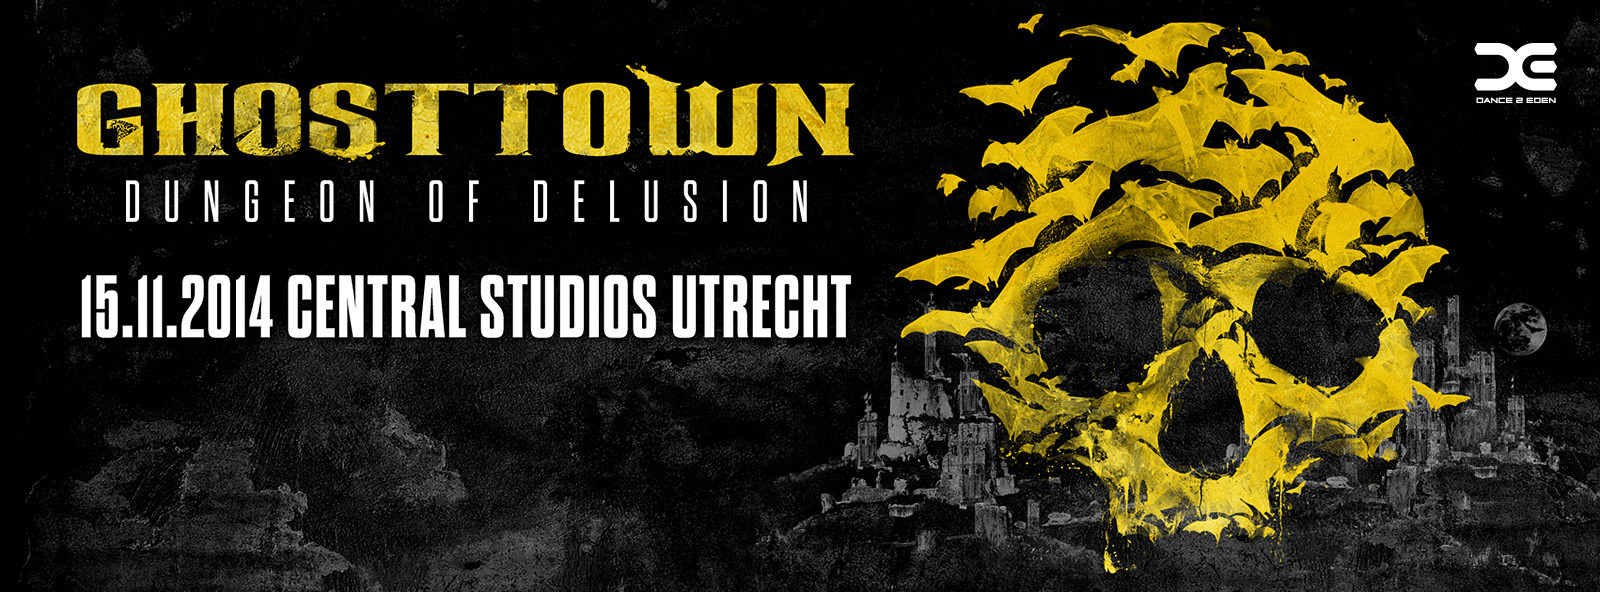 Ghosttown - Dungeon of delusion